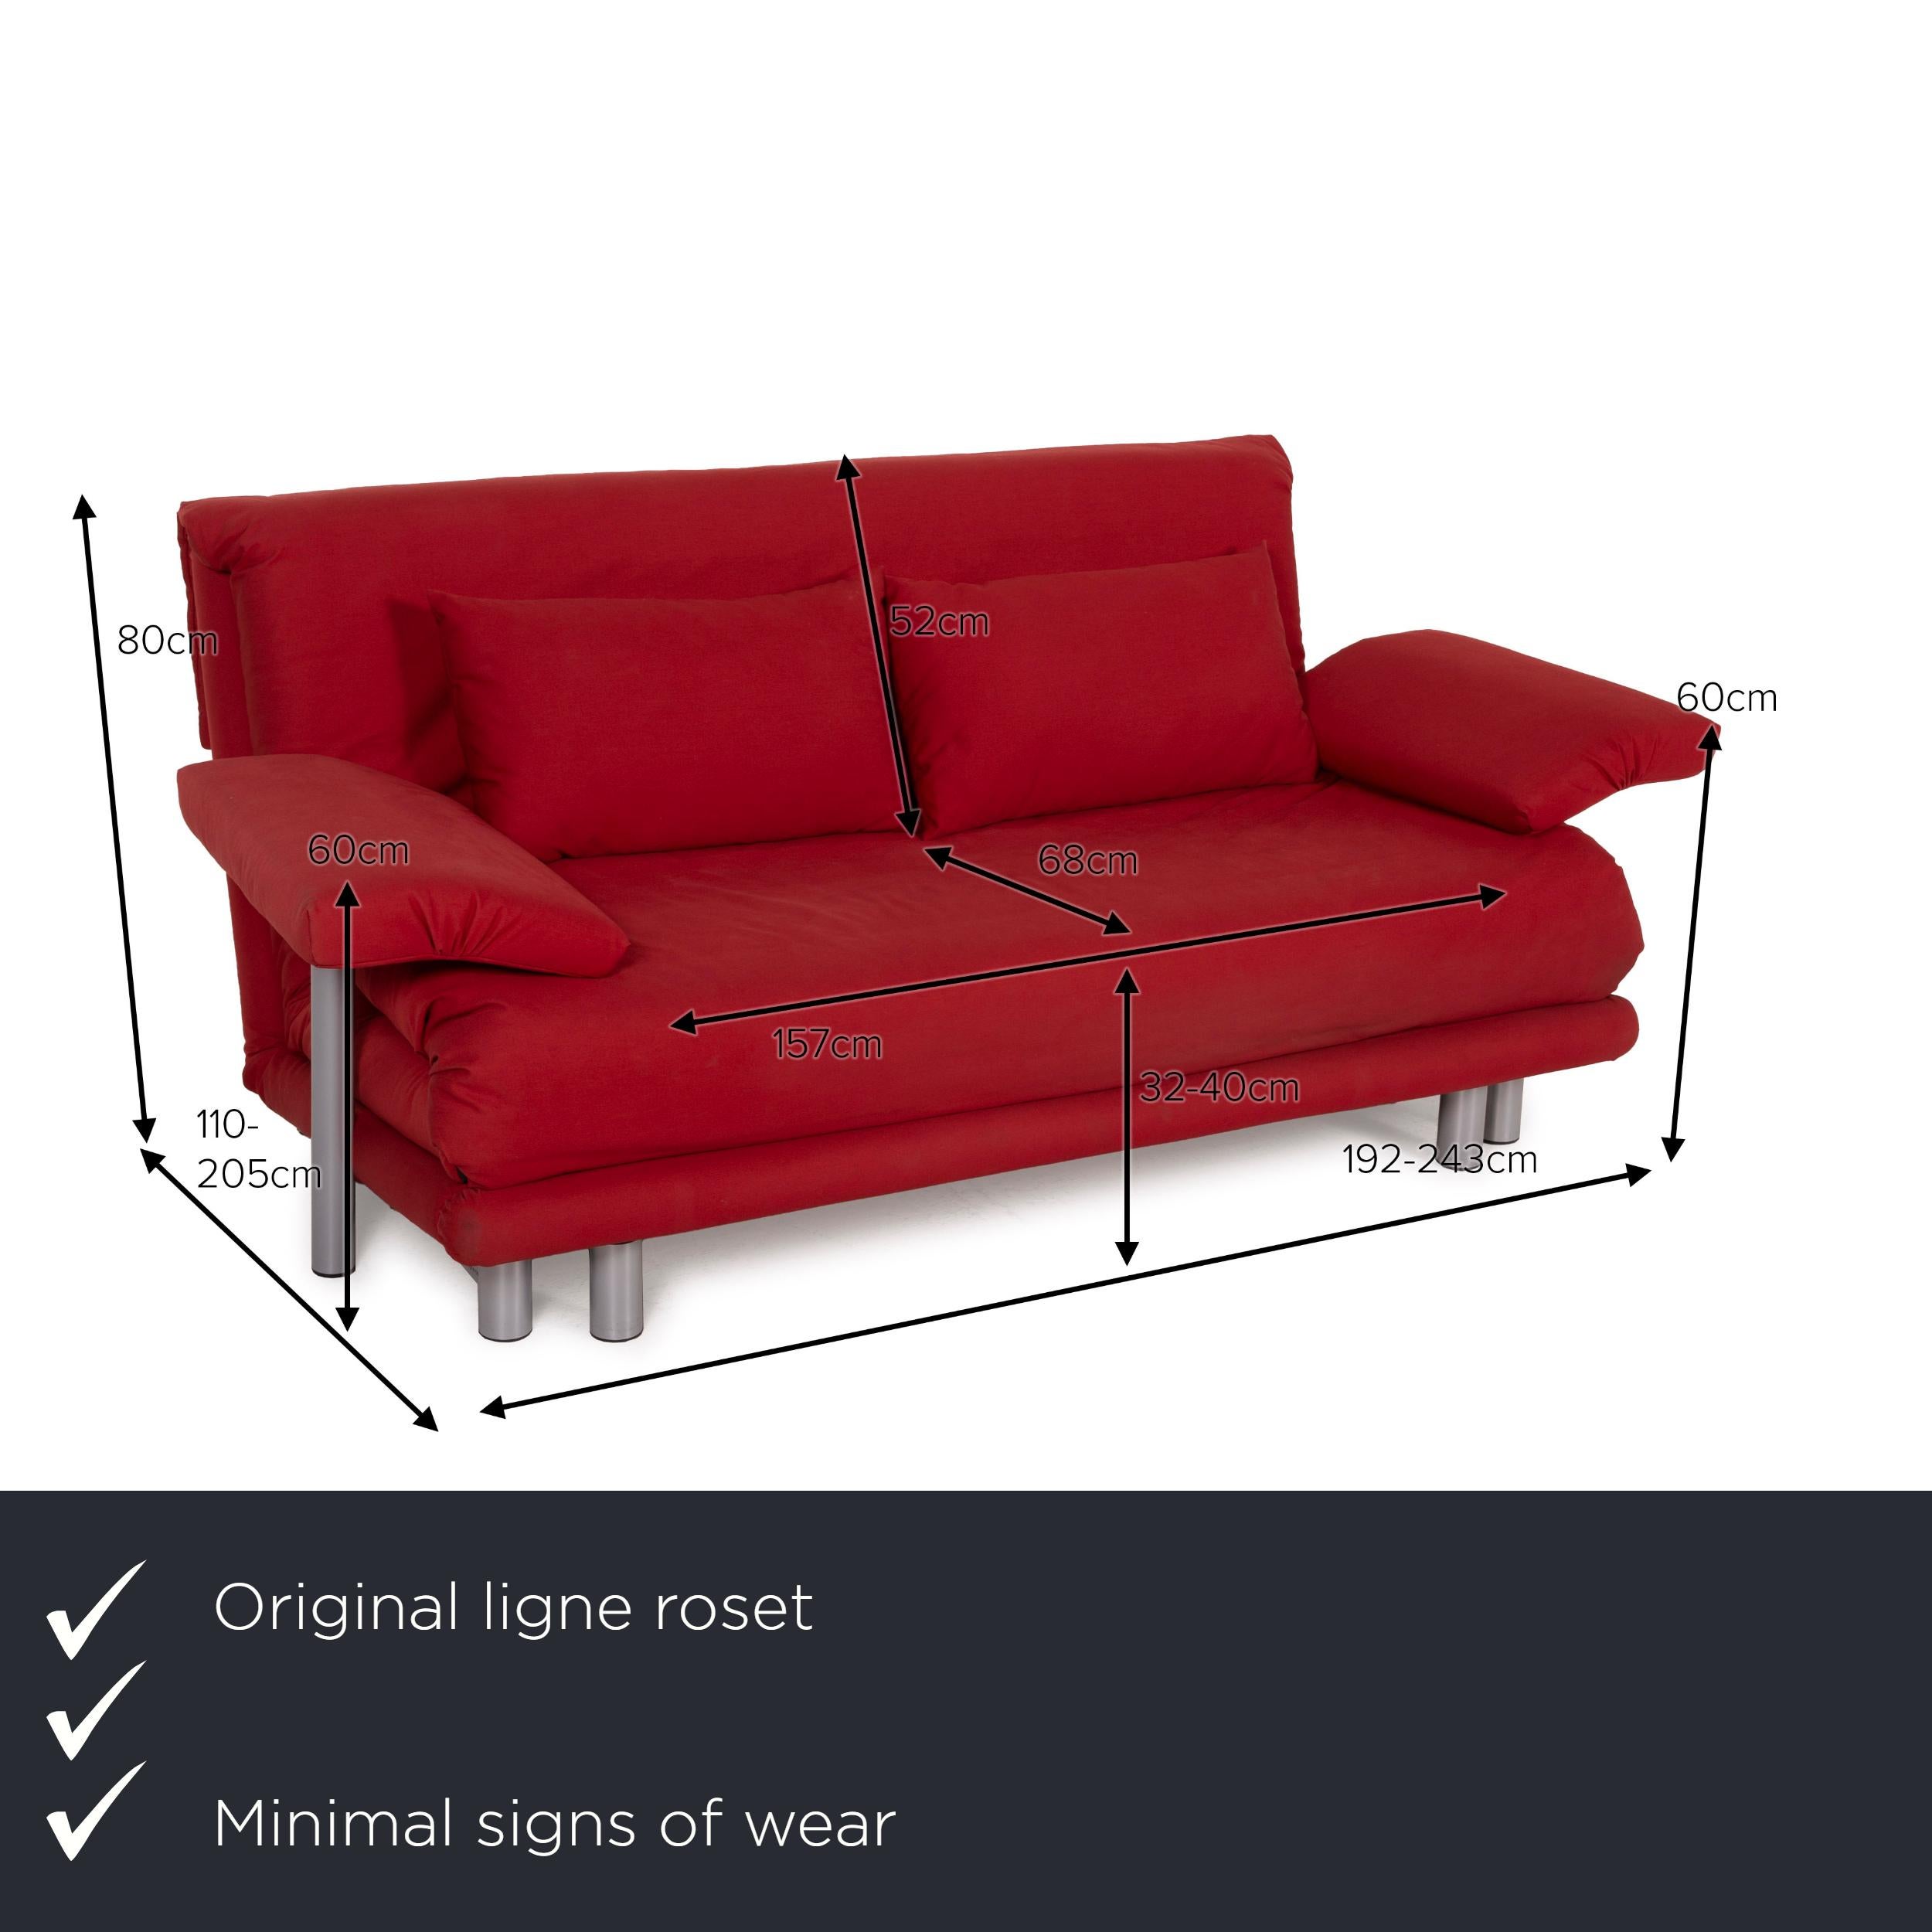 We present to you a Ligne Roset Multy fabric sofa red two-seater sleeping function sofa bed.


 Product measurements in centimeters:
 

Depth: 110
Width: 192
Height: 80
Seat height: 40
Rest height: 60
Seat depth: 68
Seat width: 157
Back